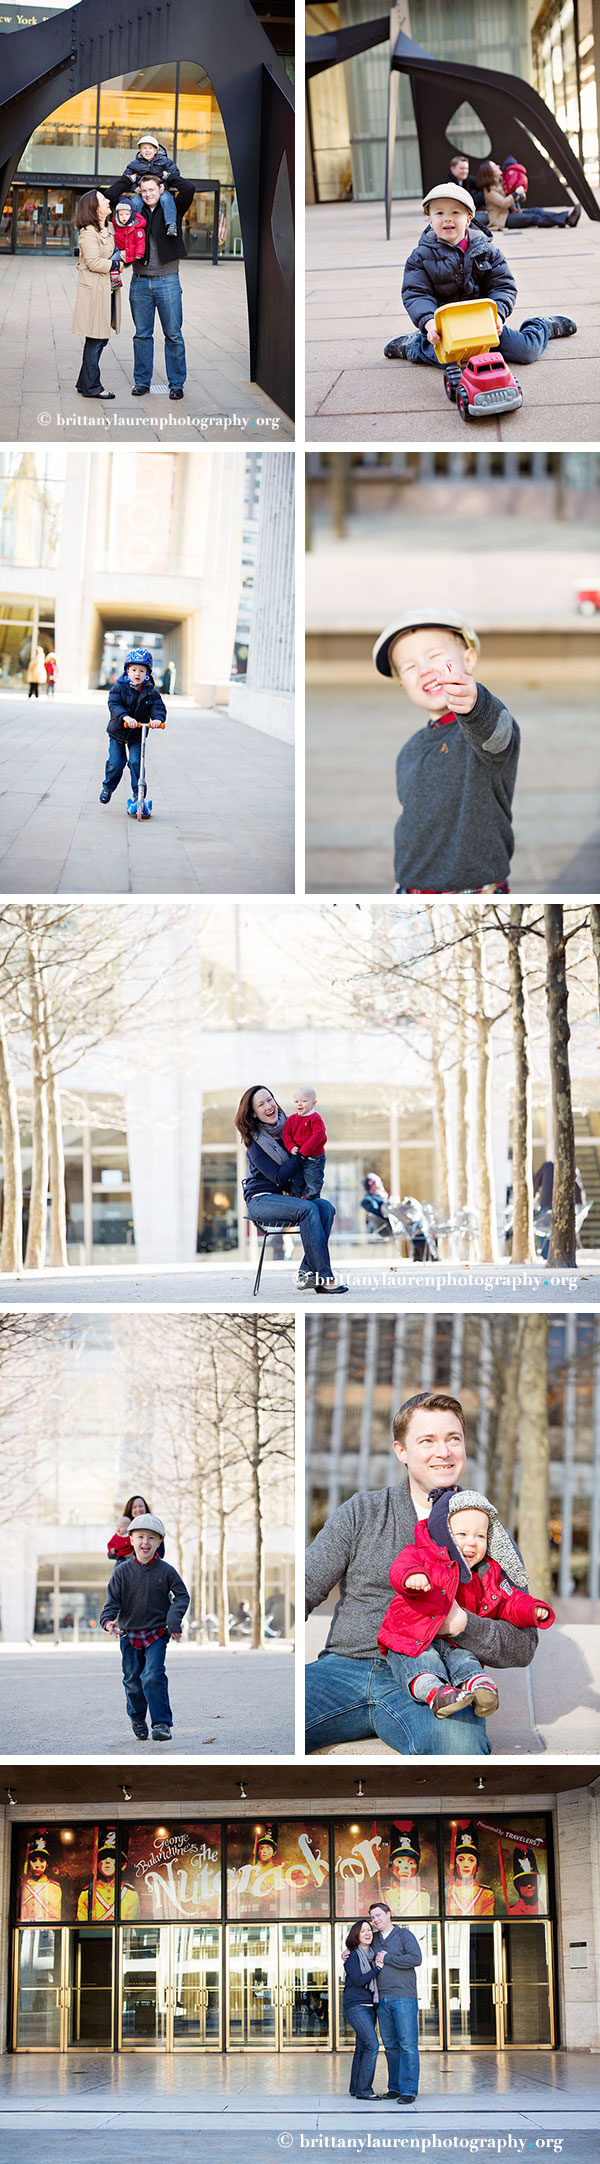 New York City Family Photography Session at Lincoln Center